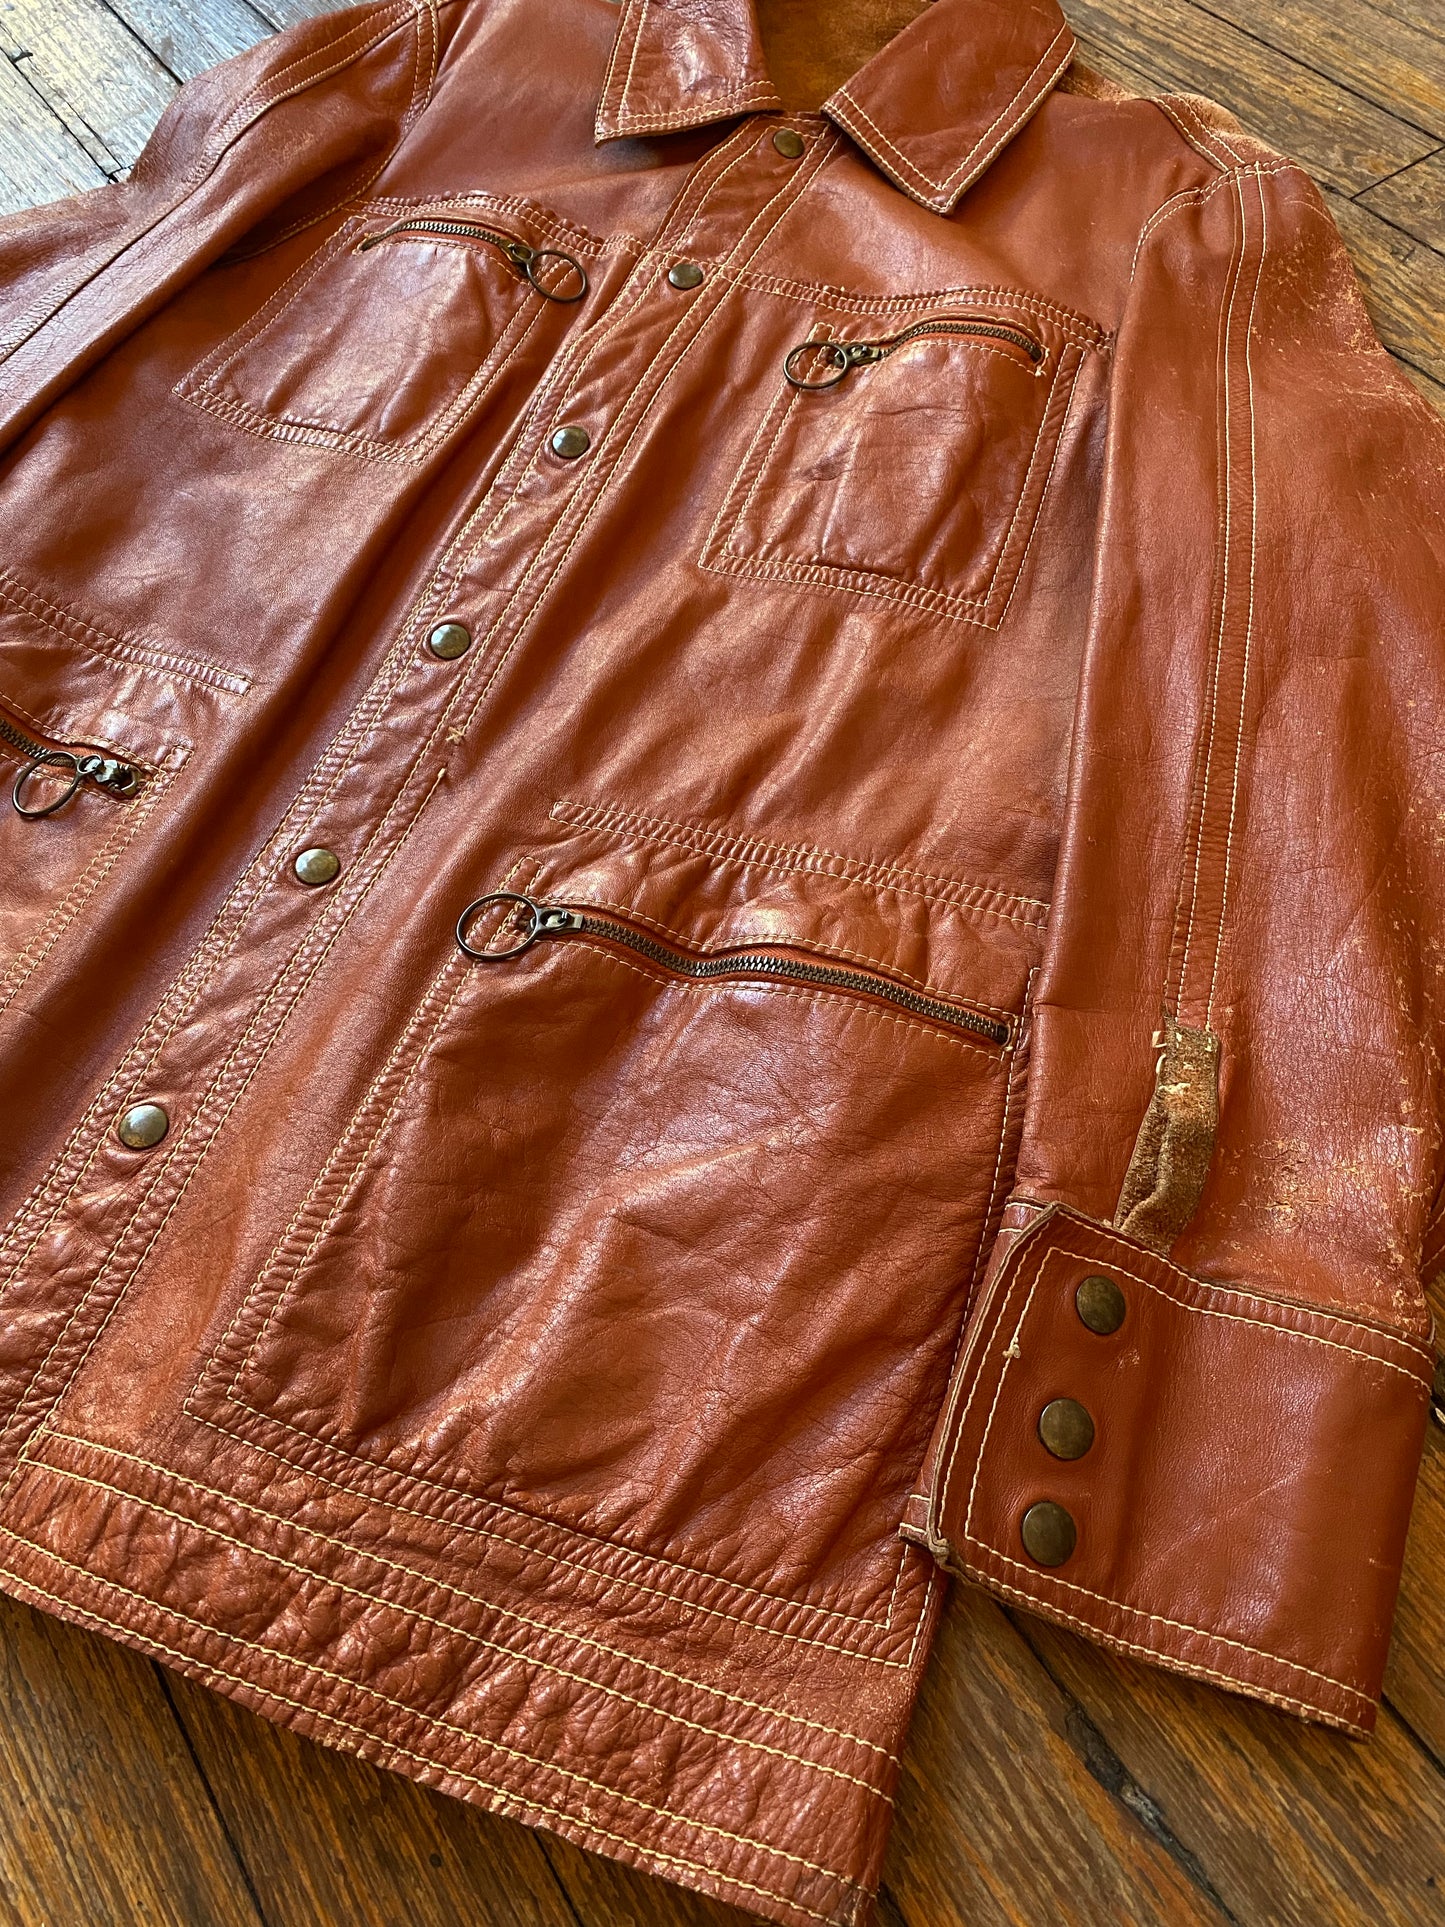 Reversible Rusty Brown Leather/Suede Jacket